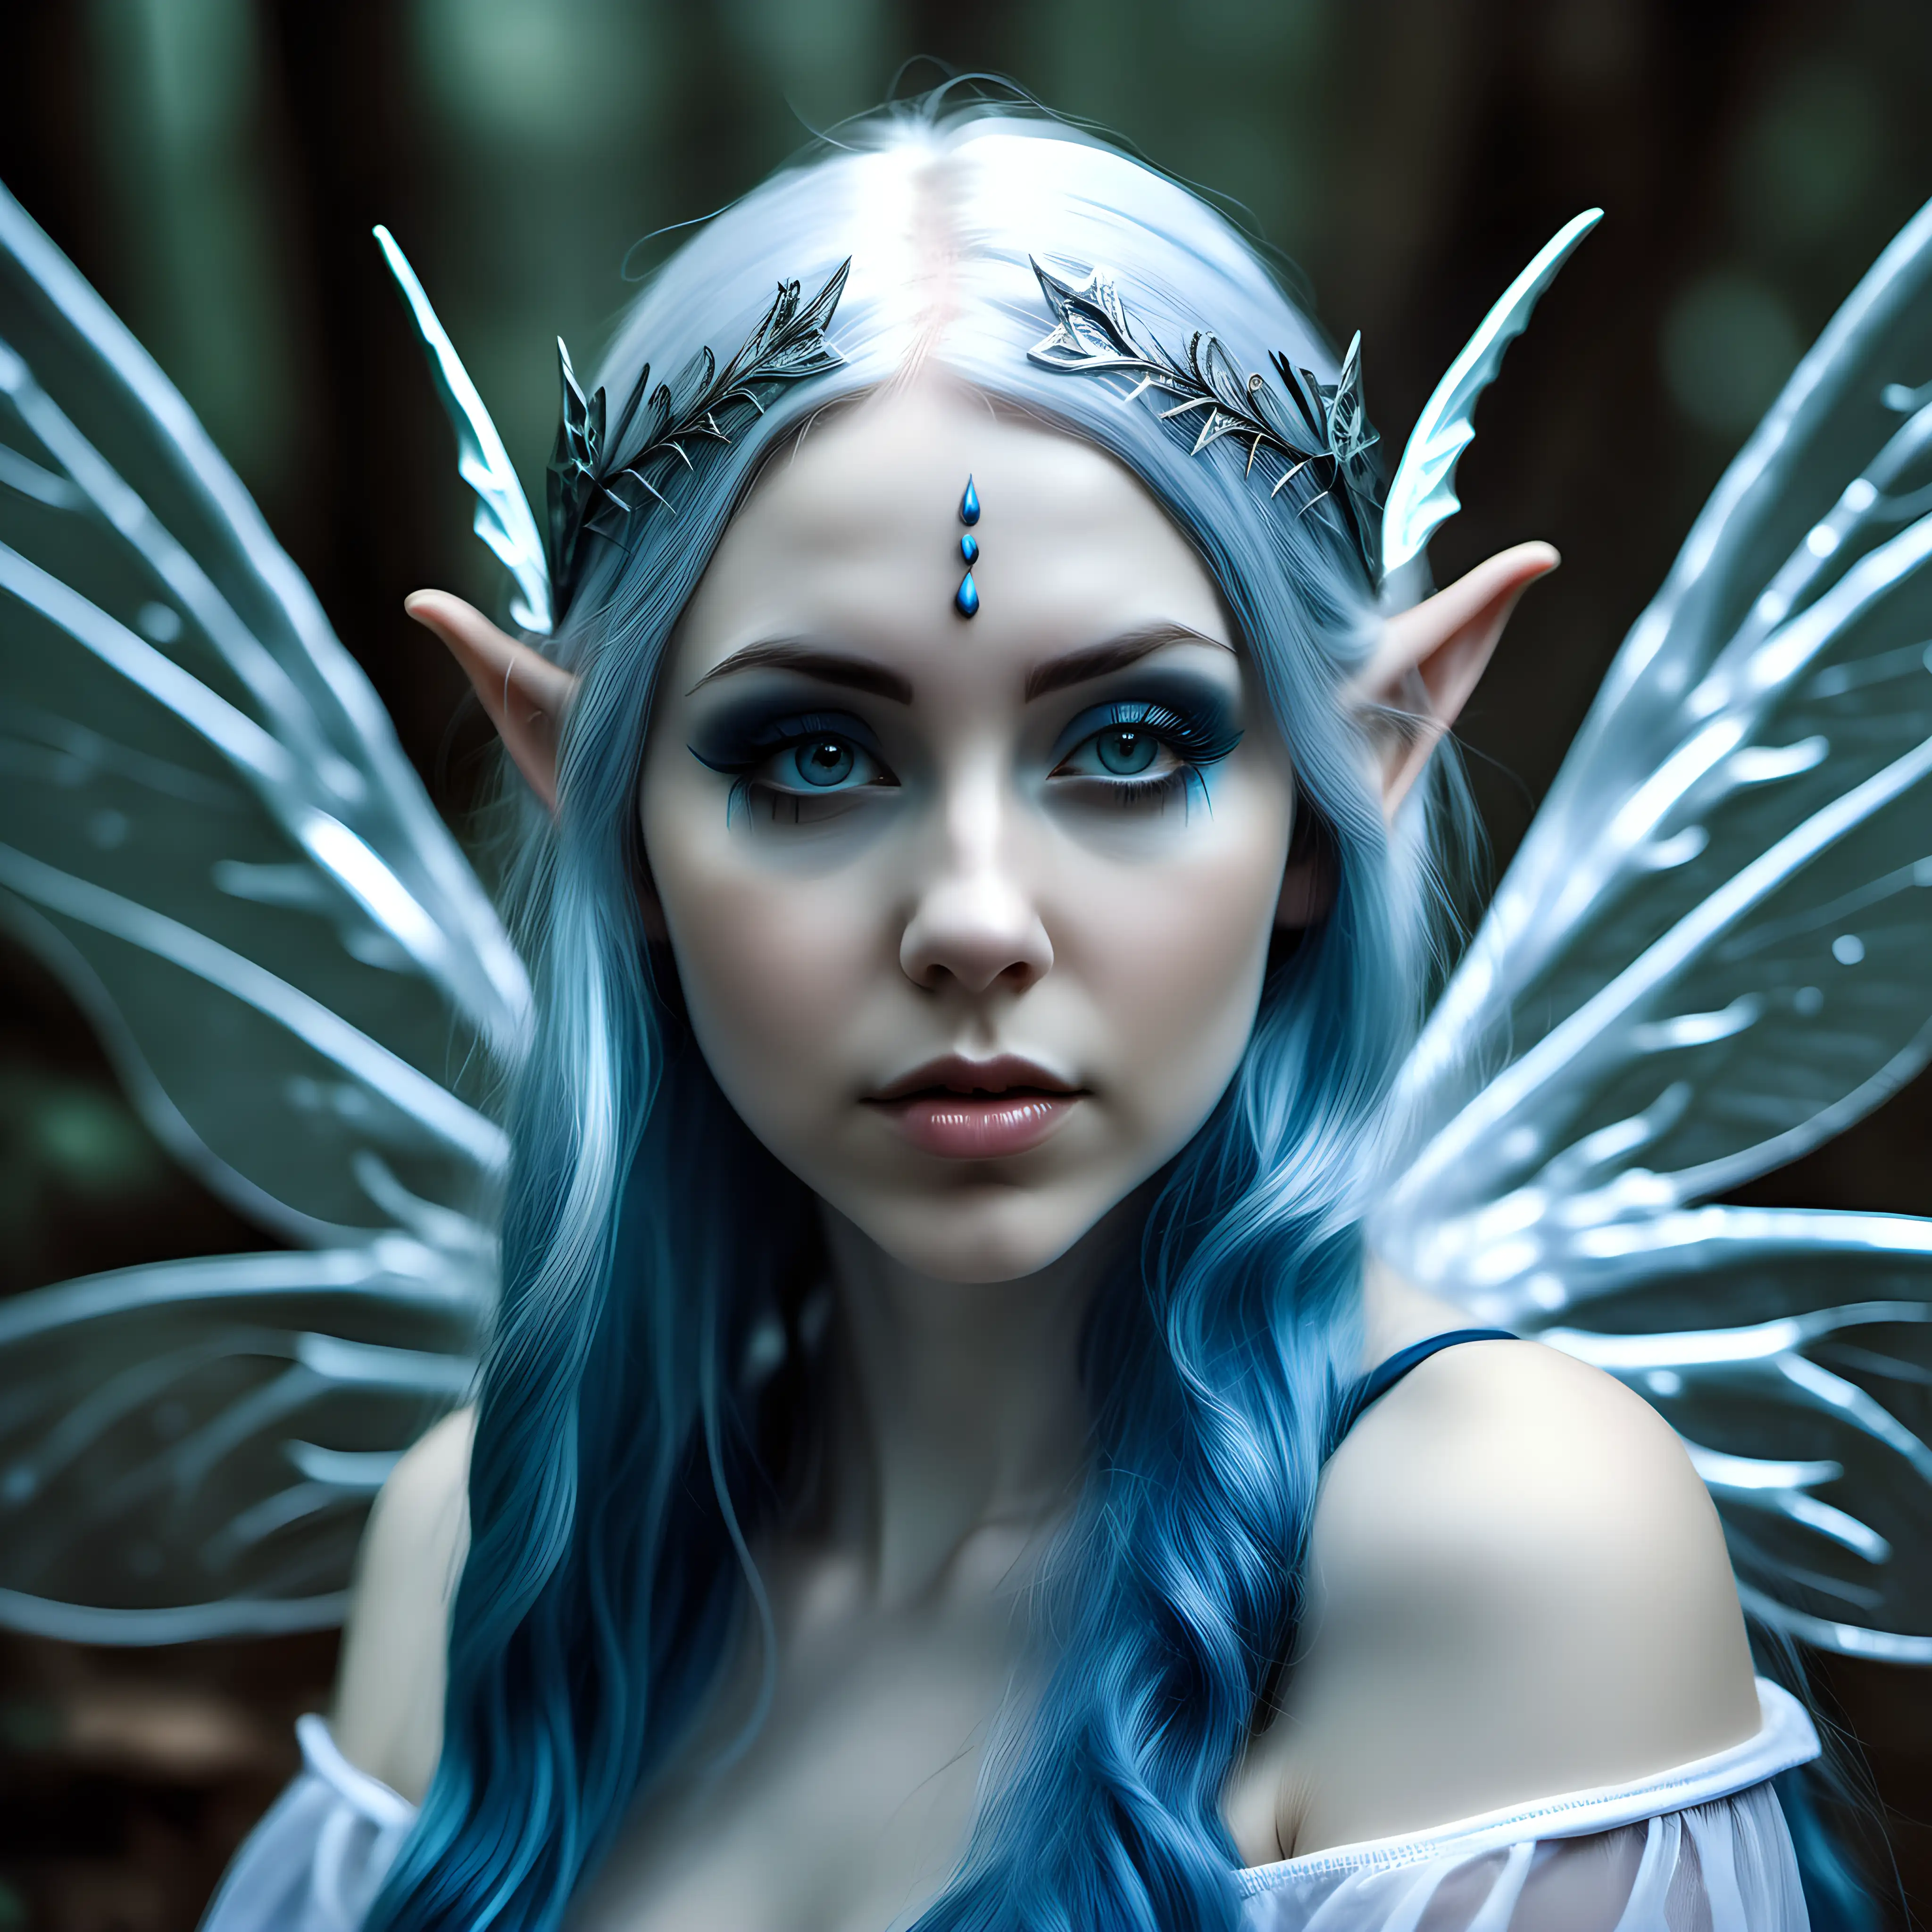 Enchanting 27YearOld Ice Elf with Fairy Wings and Blue Hair